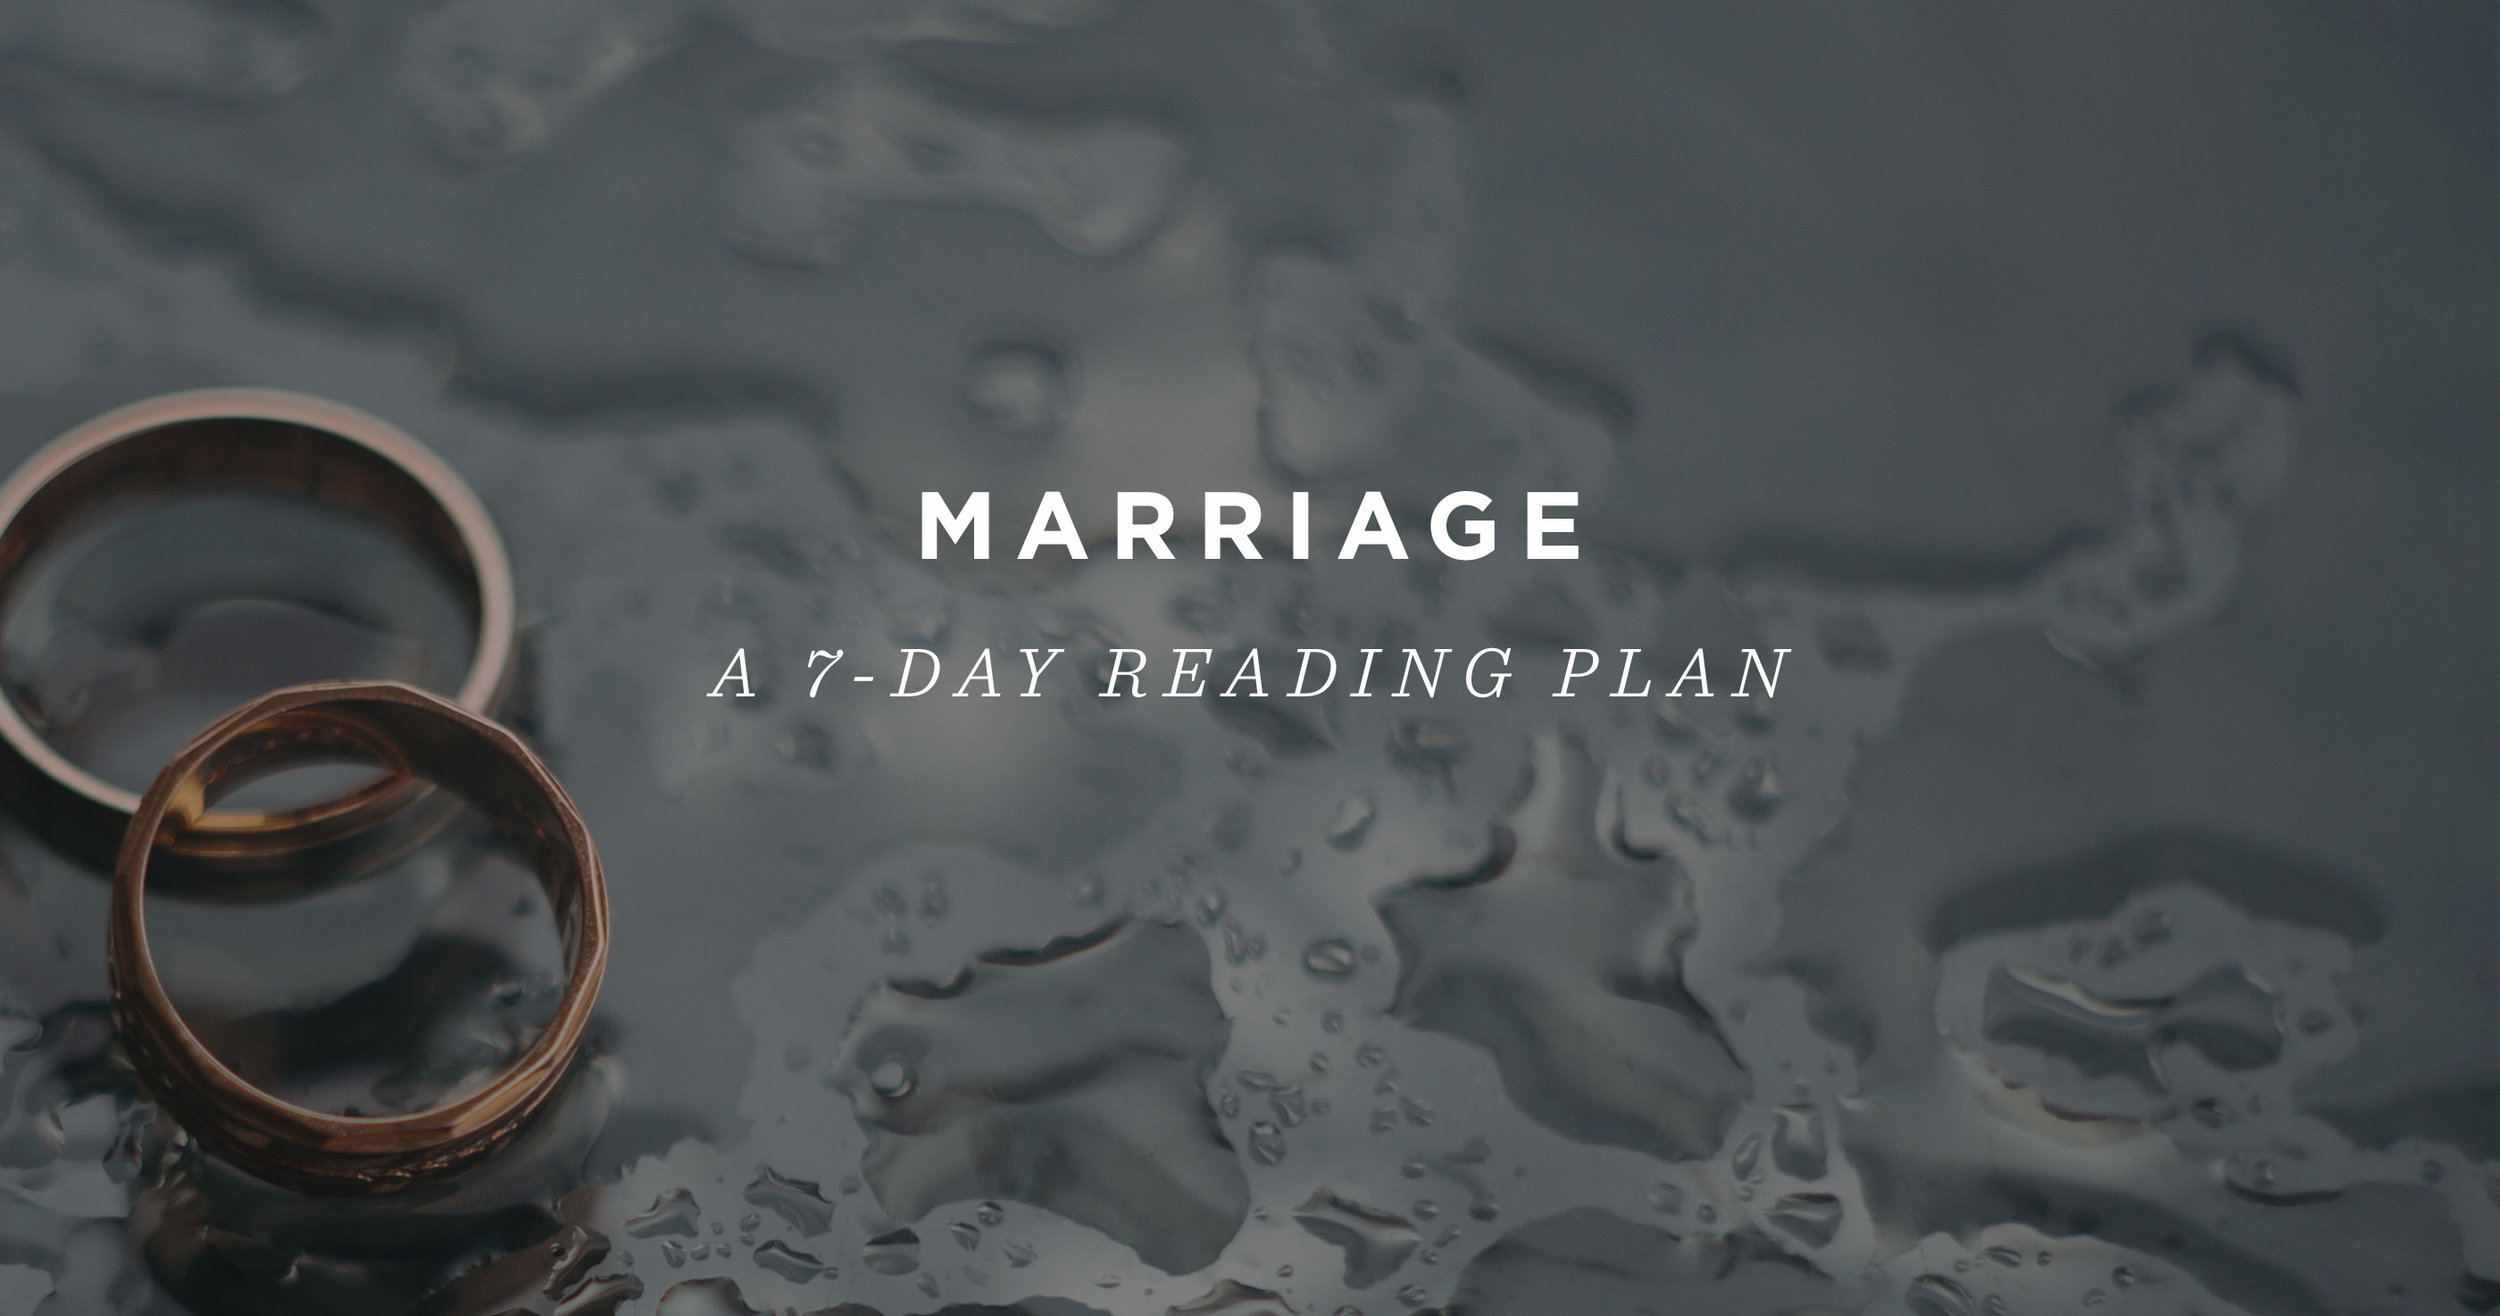 Marriage: A 7-Day Reading Plan